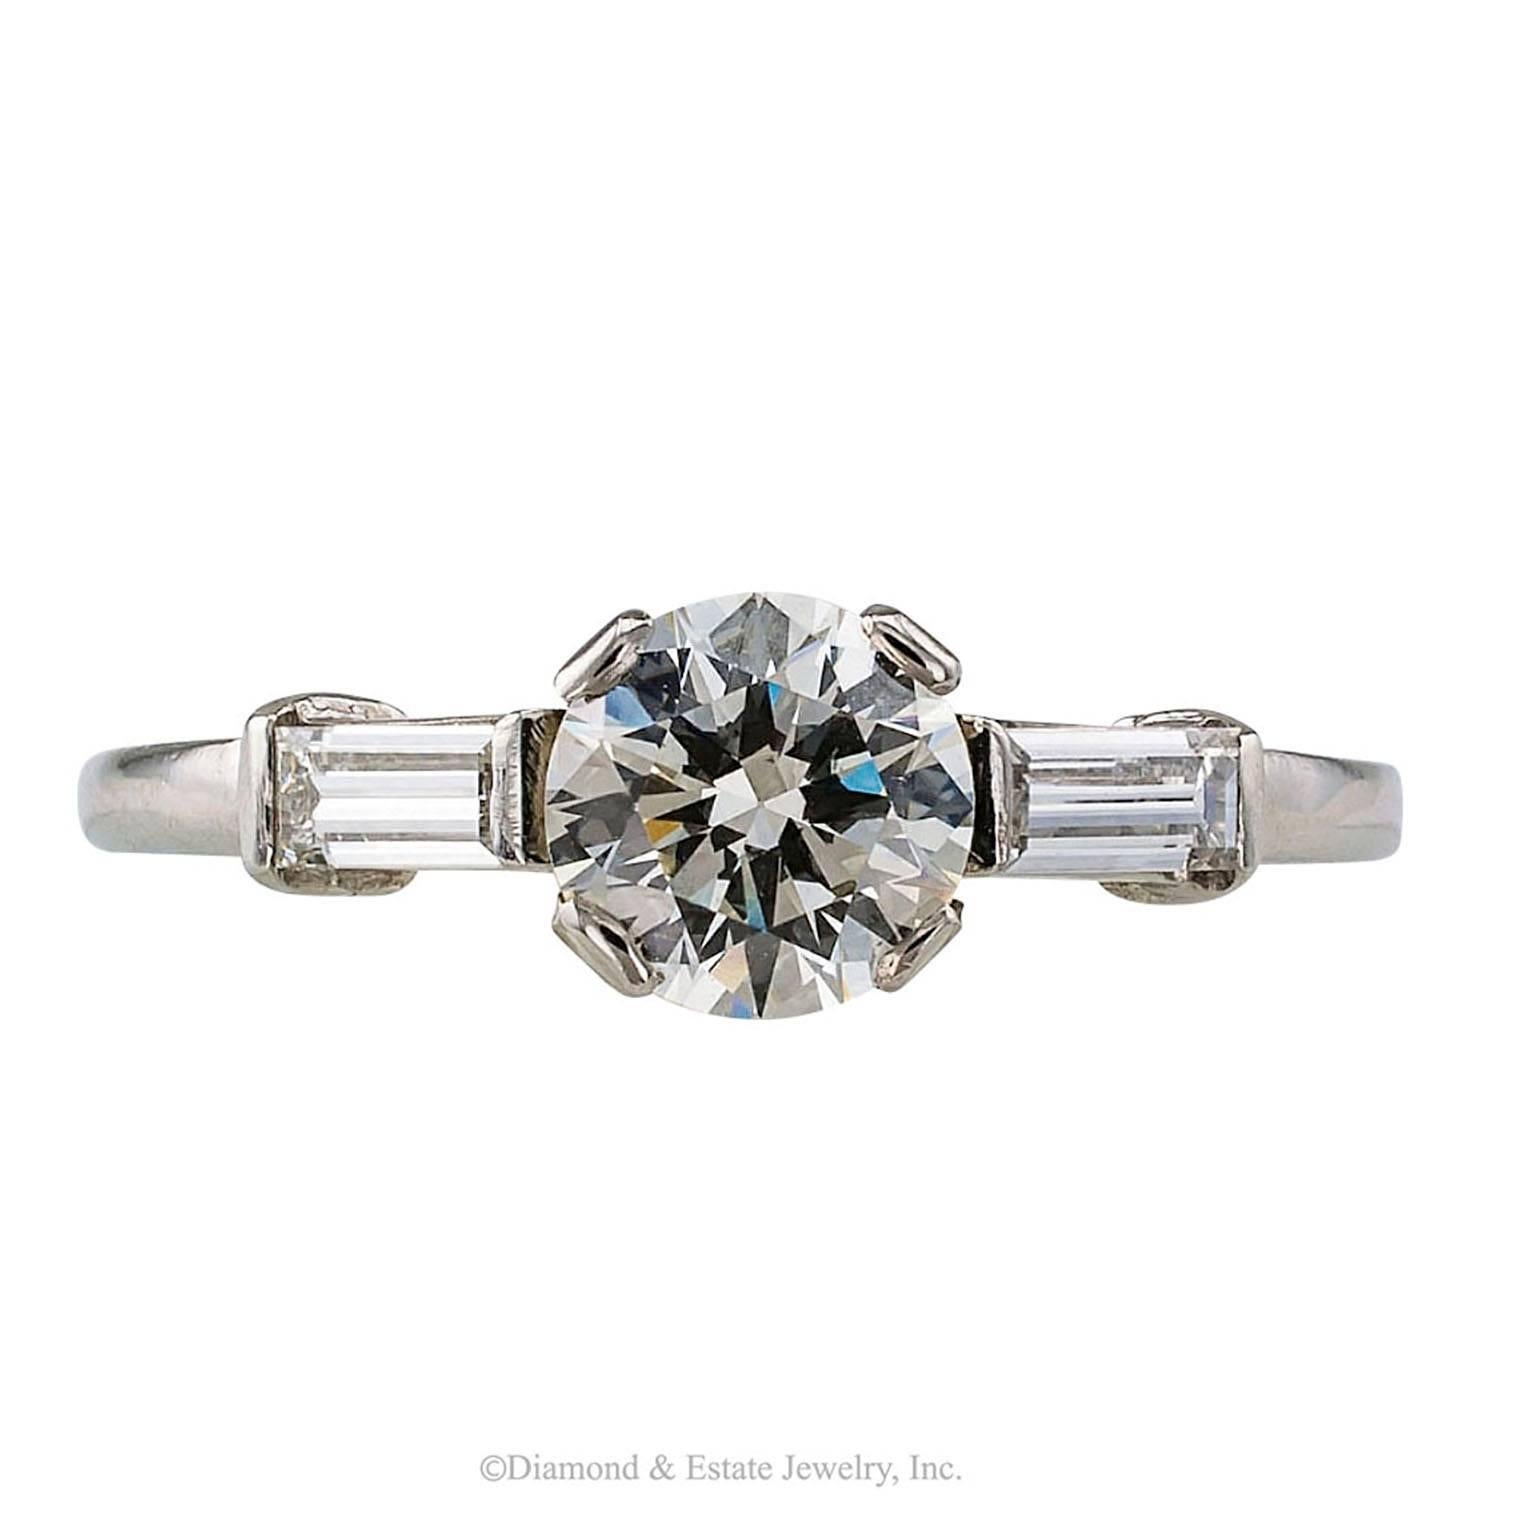 1950s 0.78 Carat Diamond Platinum Engagement Ring

Mid-century 0.78 carat diamond and platinum engagement ring circa 1950.  Perhaps this is the most classic and enduring engagement ring design to come to us in the 21st century from the 1950's, the